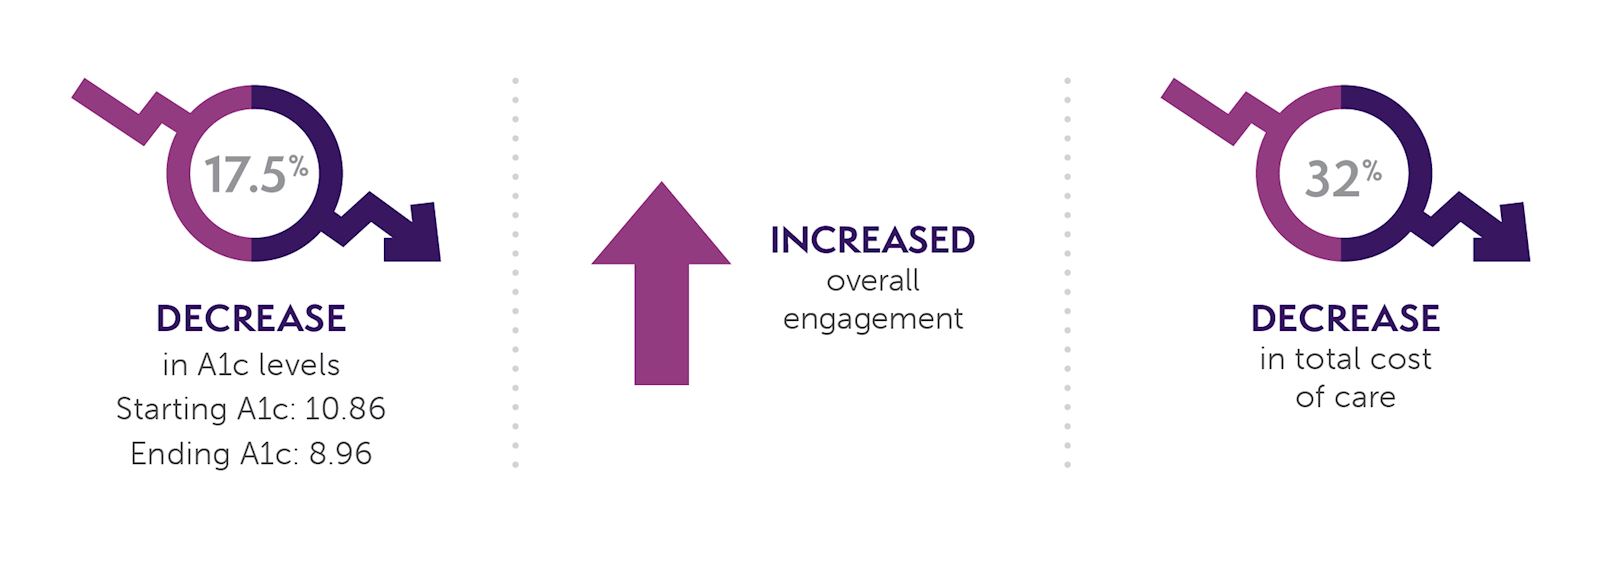 17.5% decrease in A1c level, increased overall engagement, 32% decrease in total cost of care